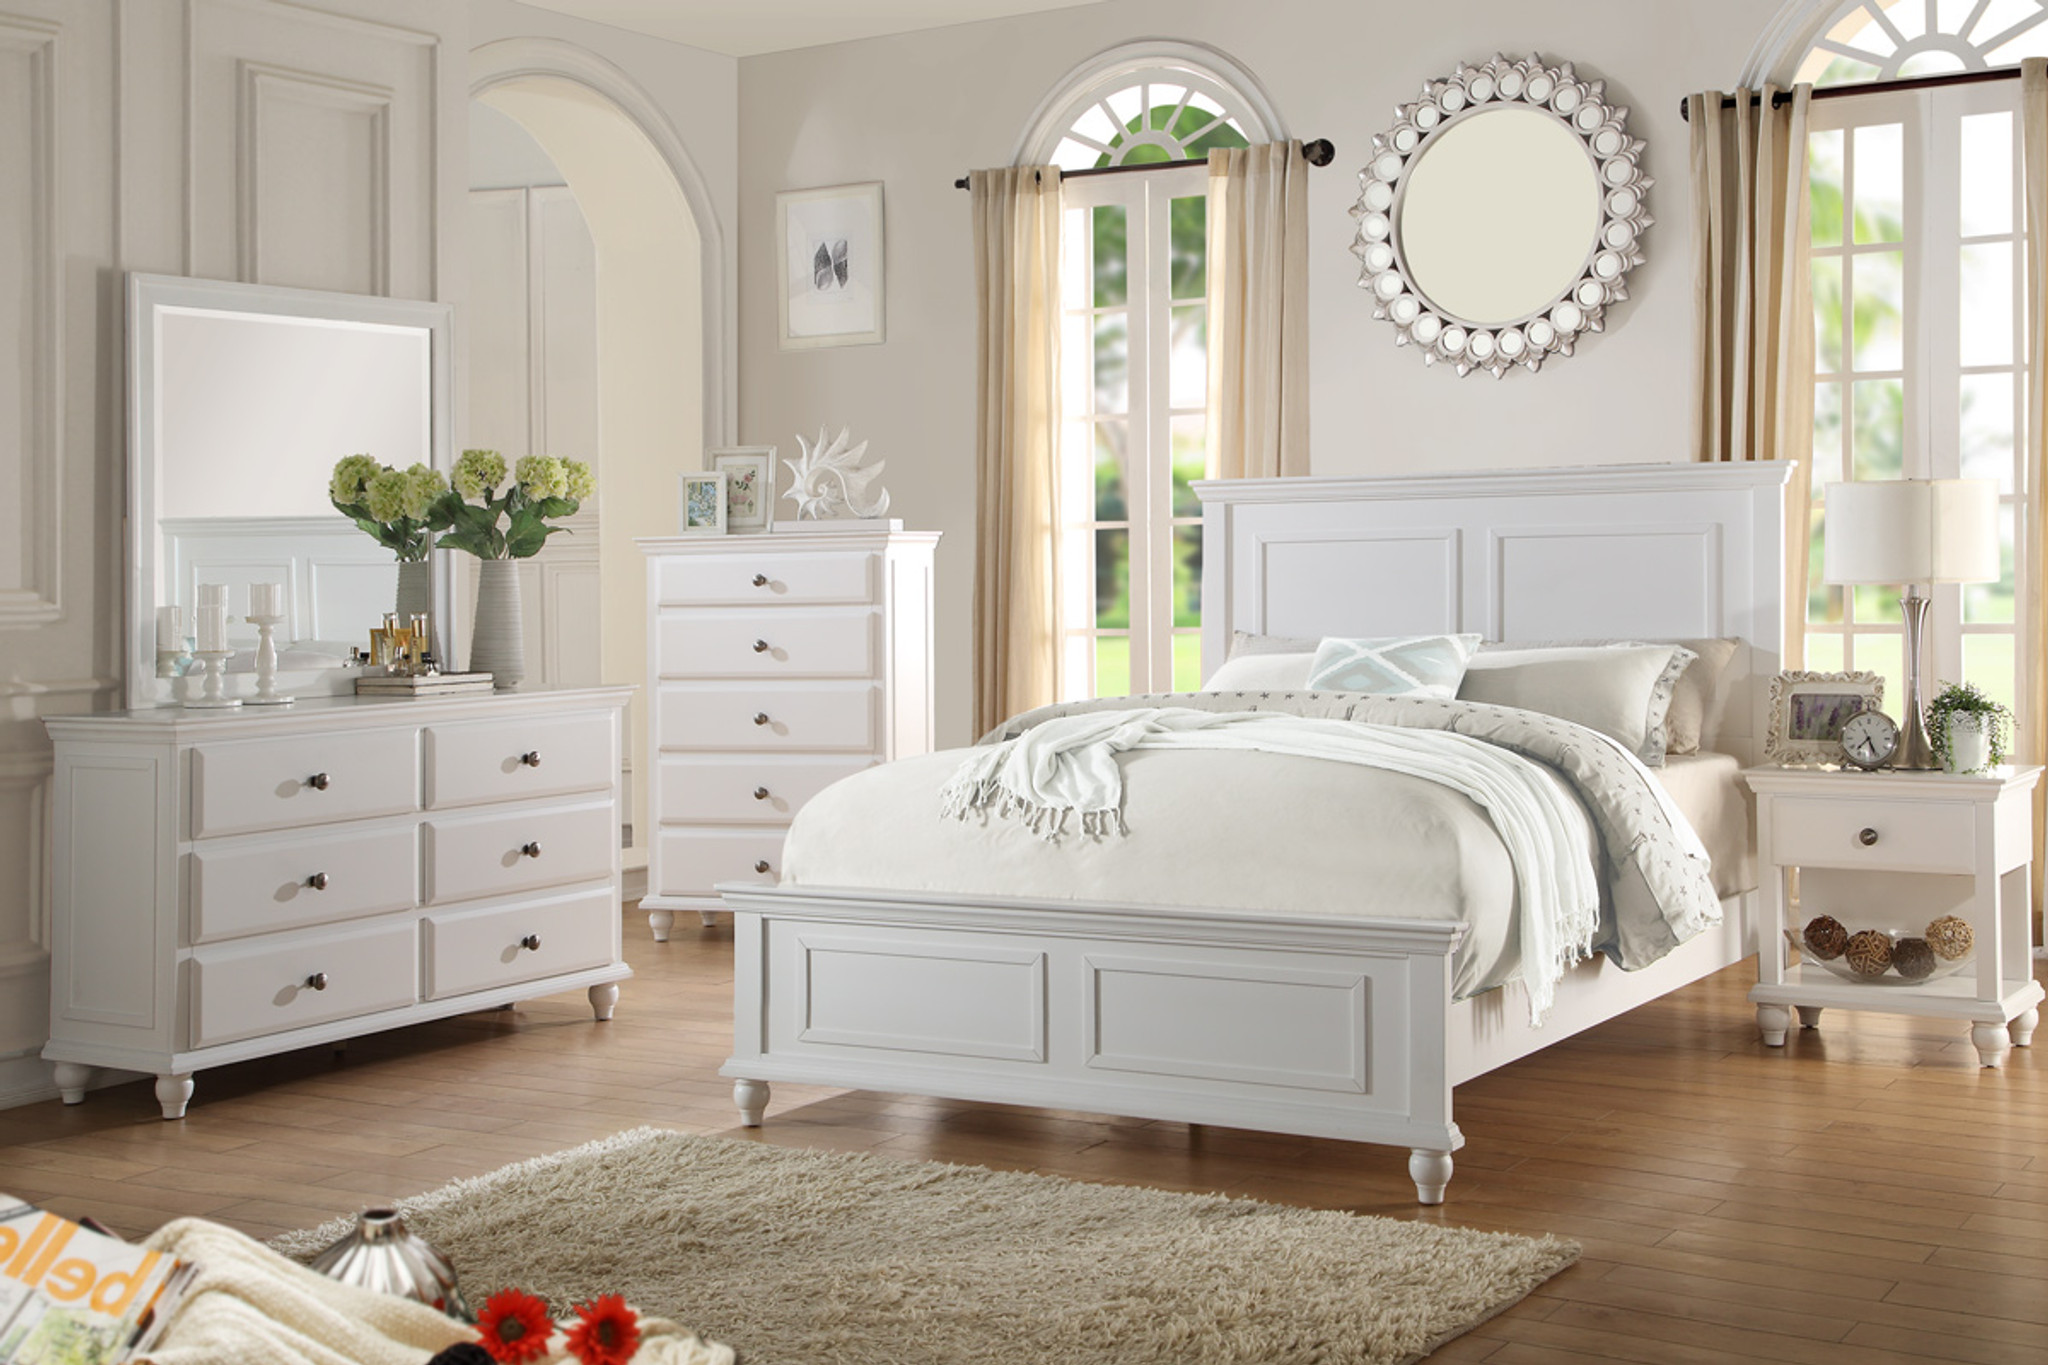 Kassa Mall Home Furniture F9270 White Queen King Bedframe For